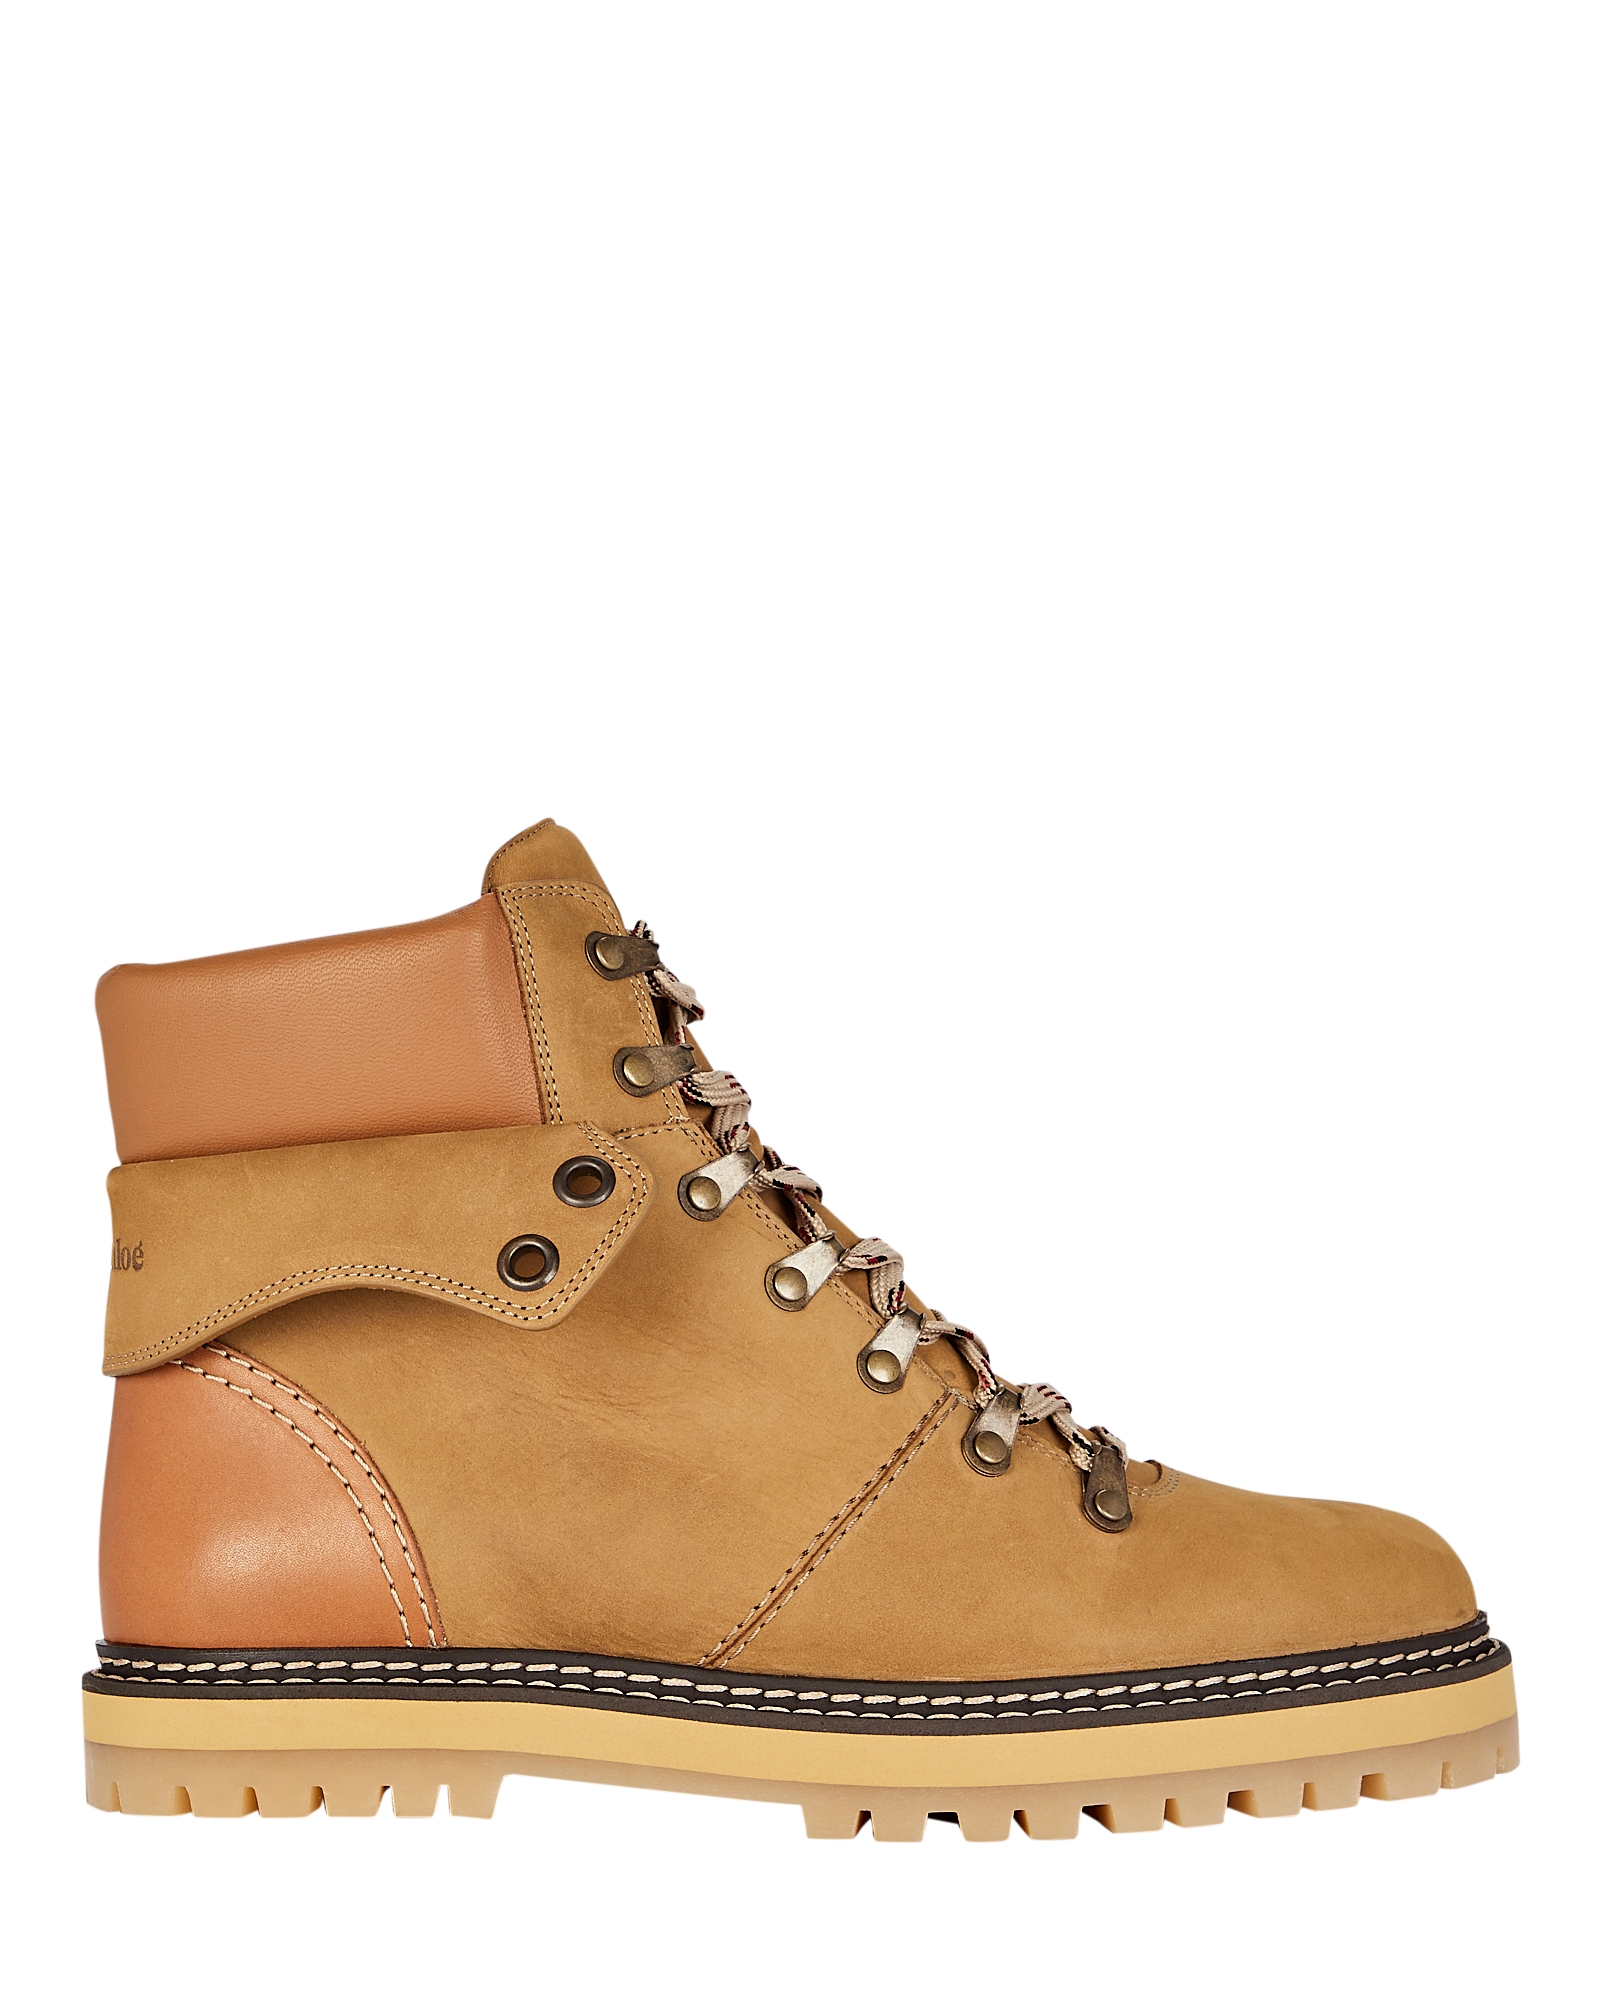 See By Chloé Eileen Leather Hiking Boots | INTERMIX®